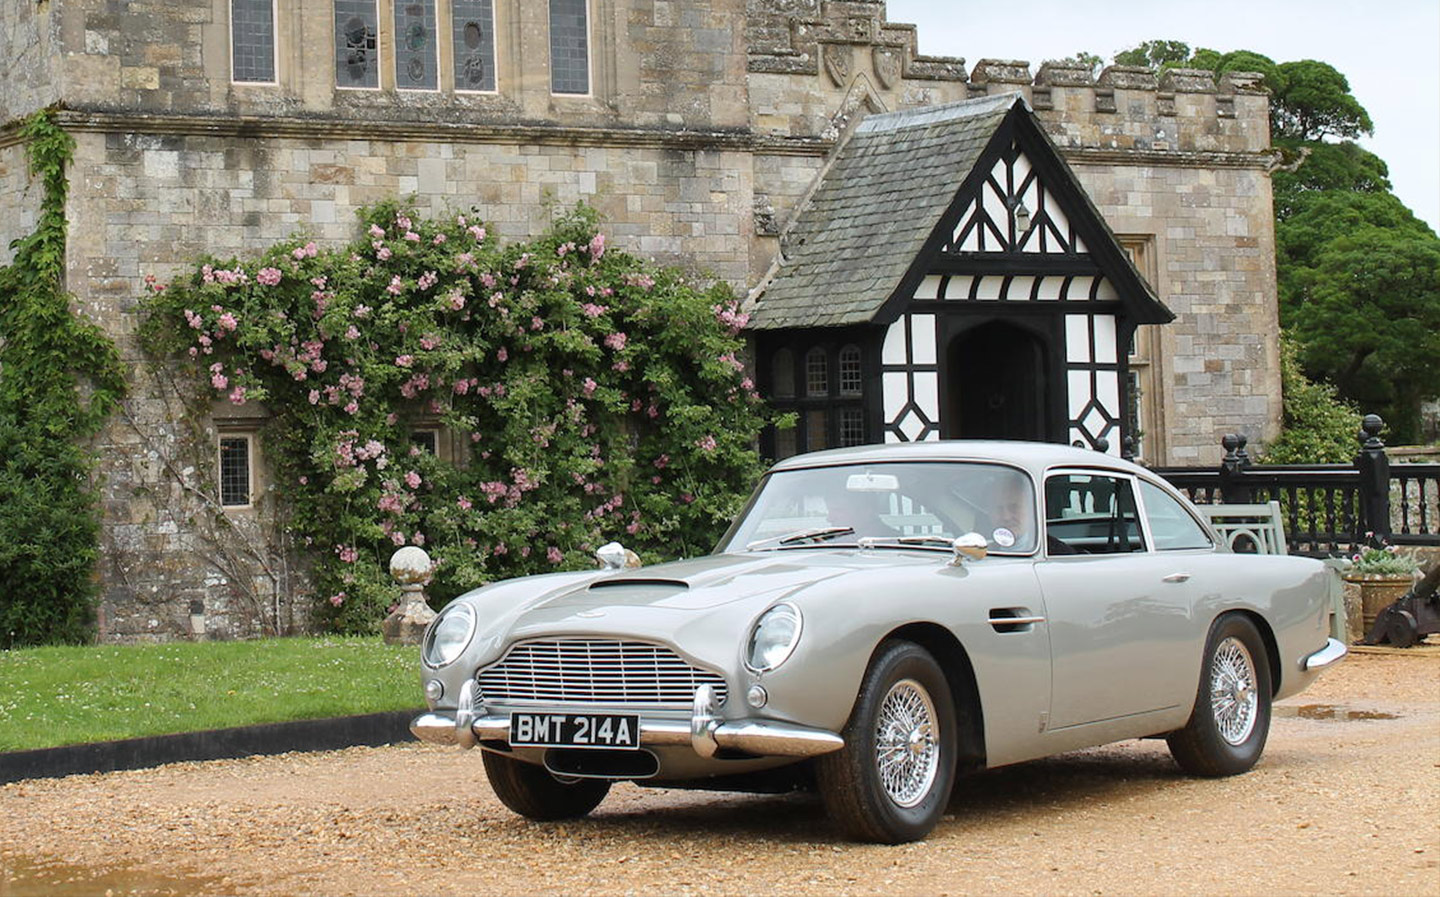 James Bond Aston Martin DB5 driven by Pierce Brosnan in GoldenEye could sell for record £1.6m